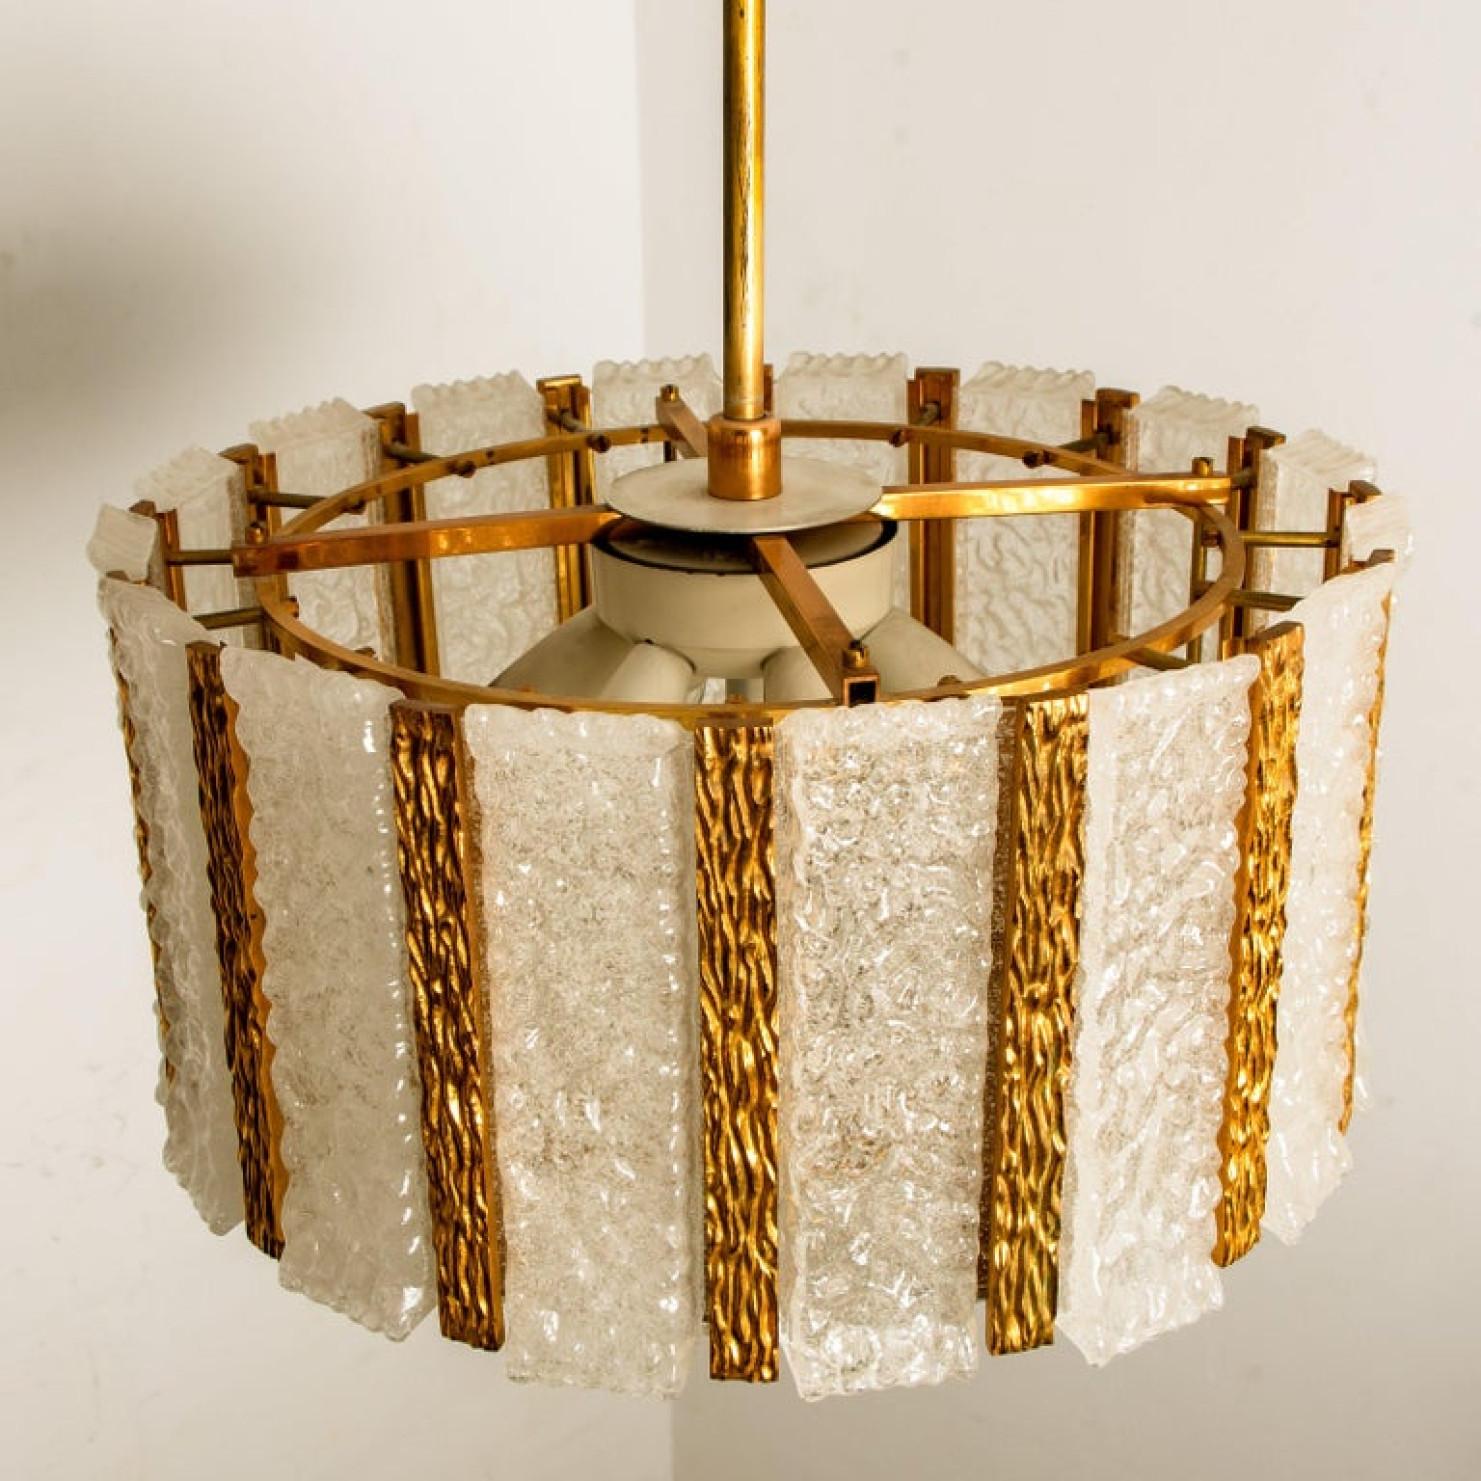 Other Set of 7 Gold-Plated Bronze Drum Light Fixtures, 1960s, Austria For Sale